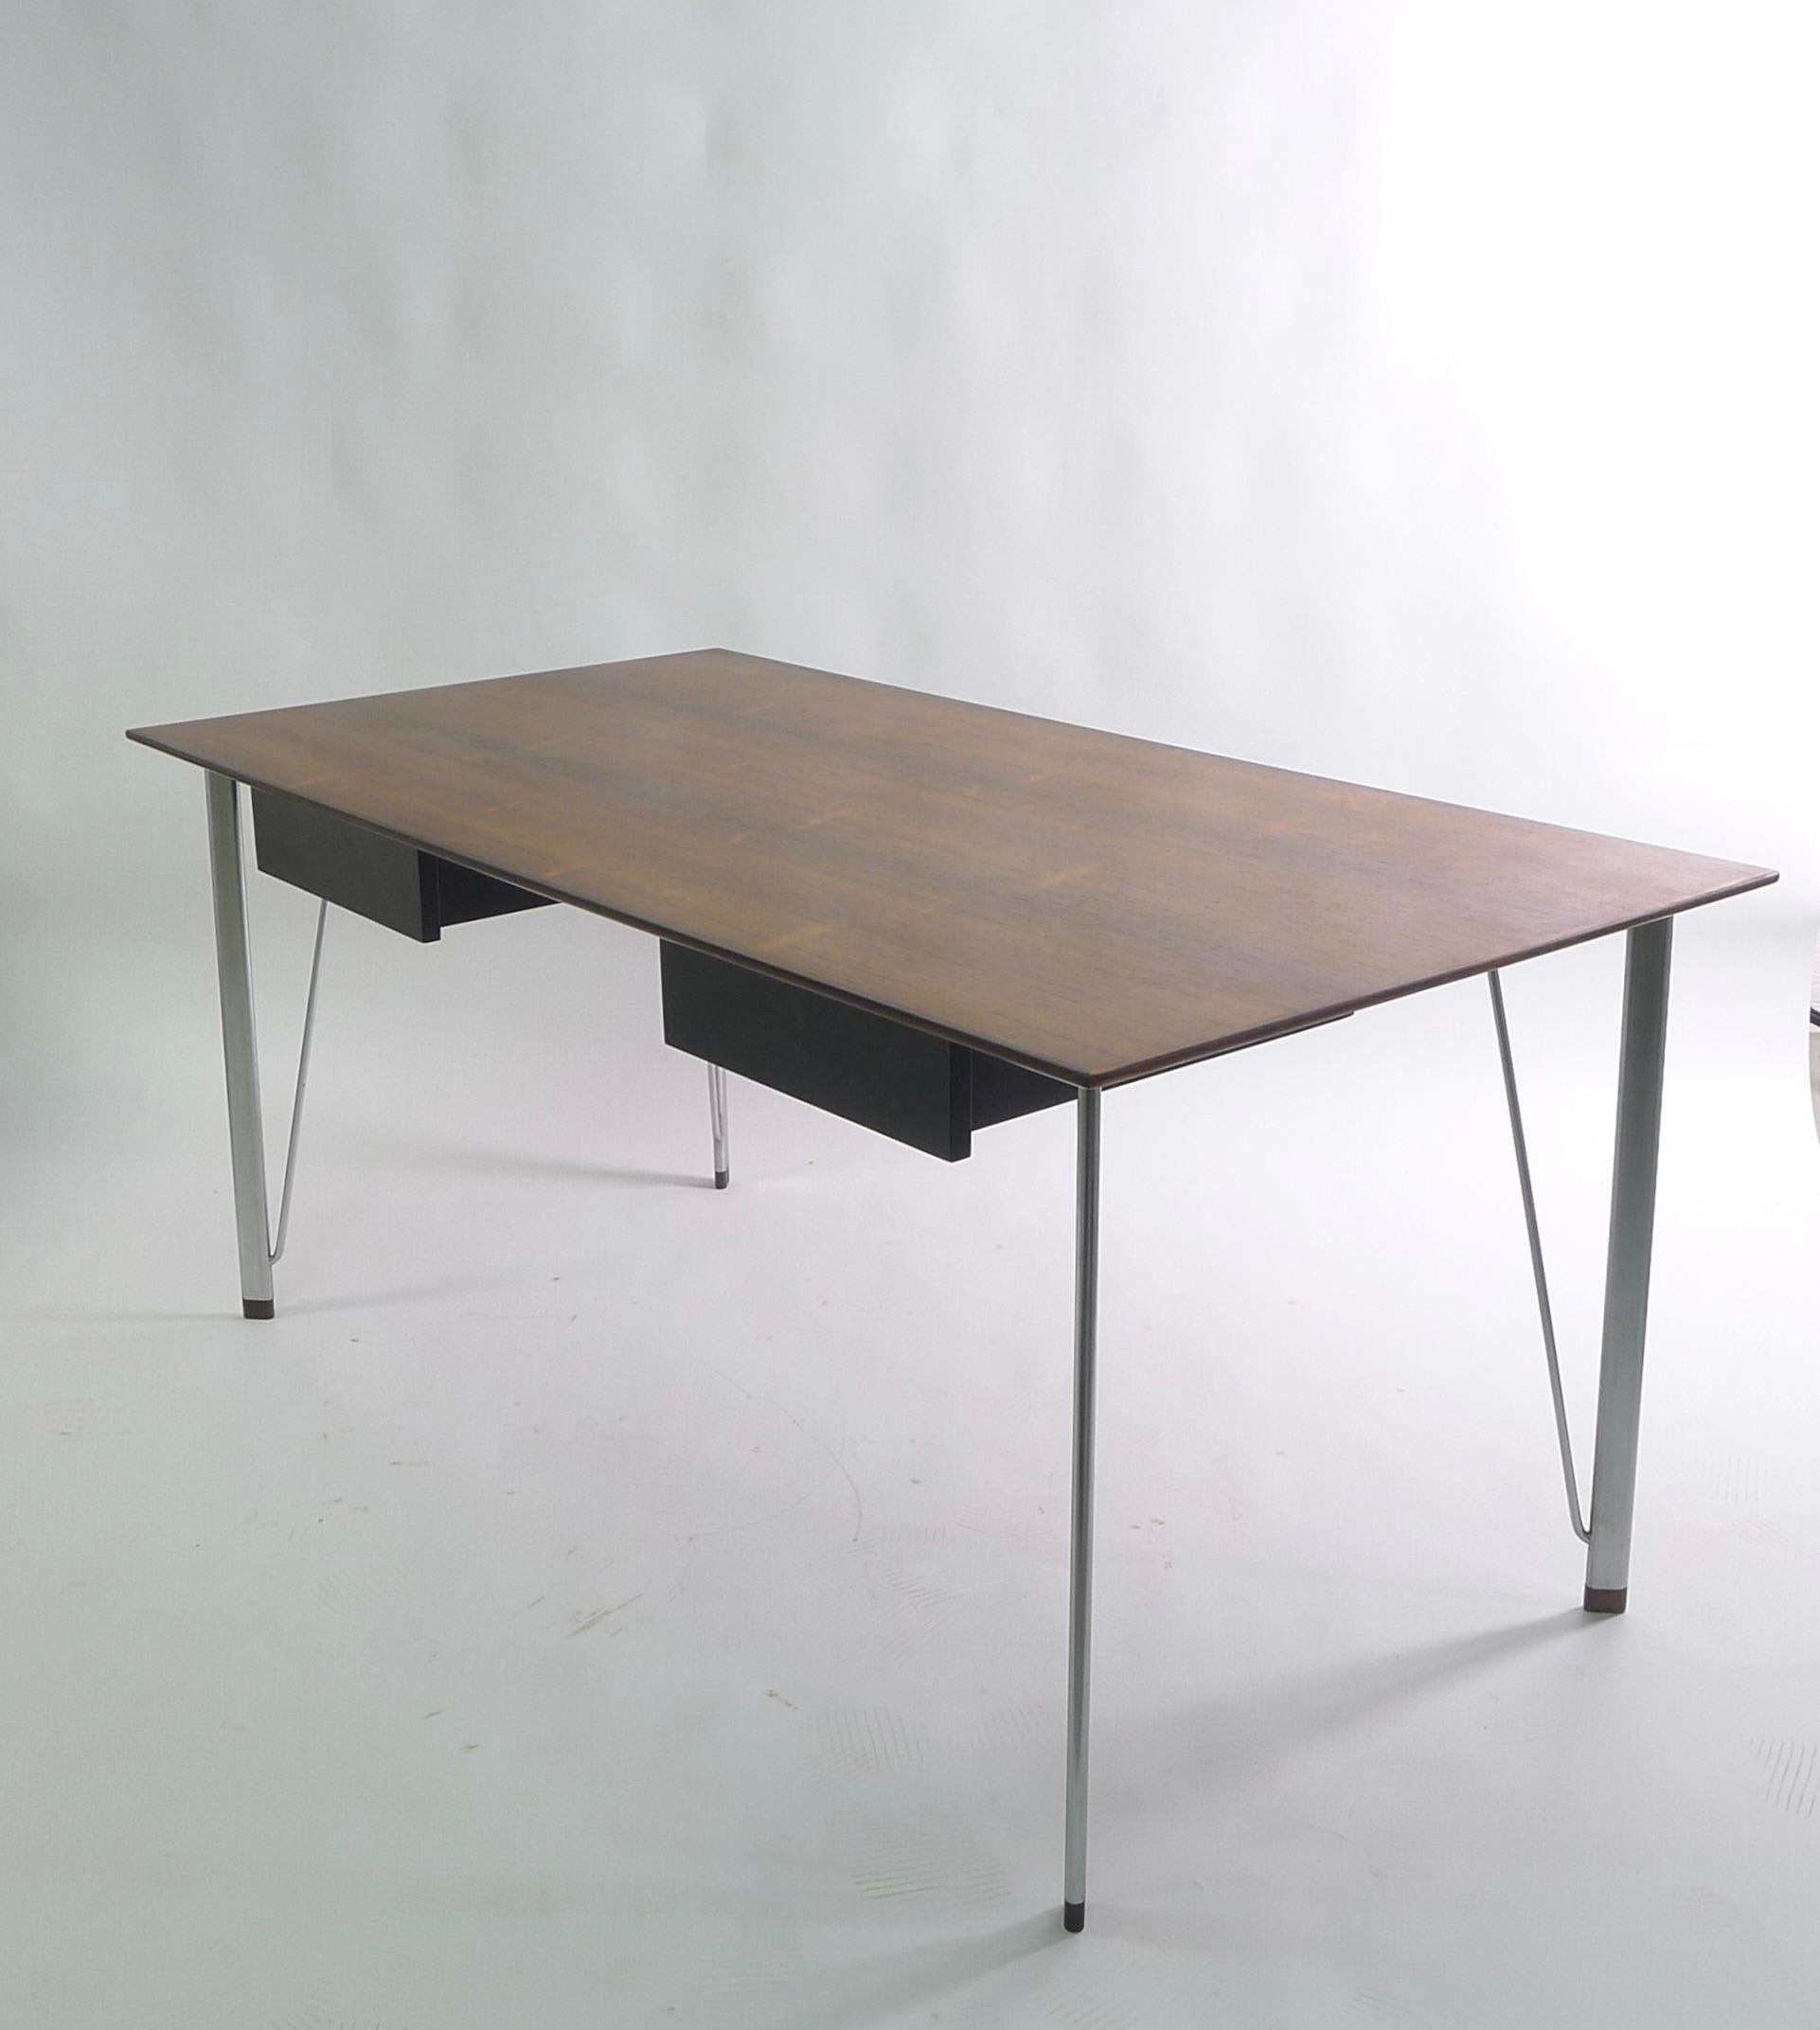 Arne Jacobsen Rosewood and Steel Writing Desk FH3605, Danish, Designed 1955 In Good Condition For Sale In Wargrave, Berkshire